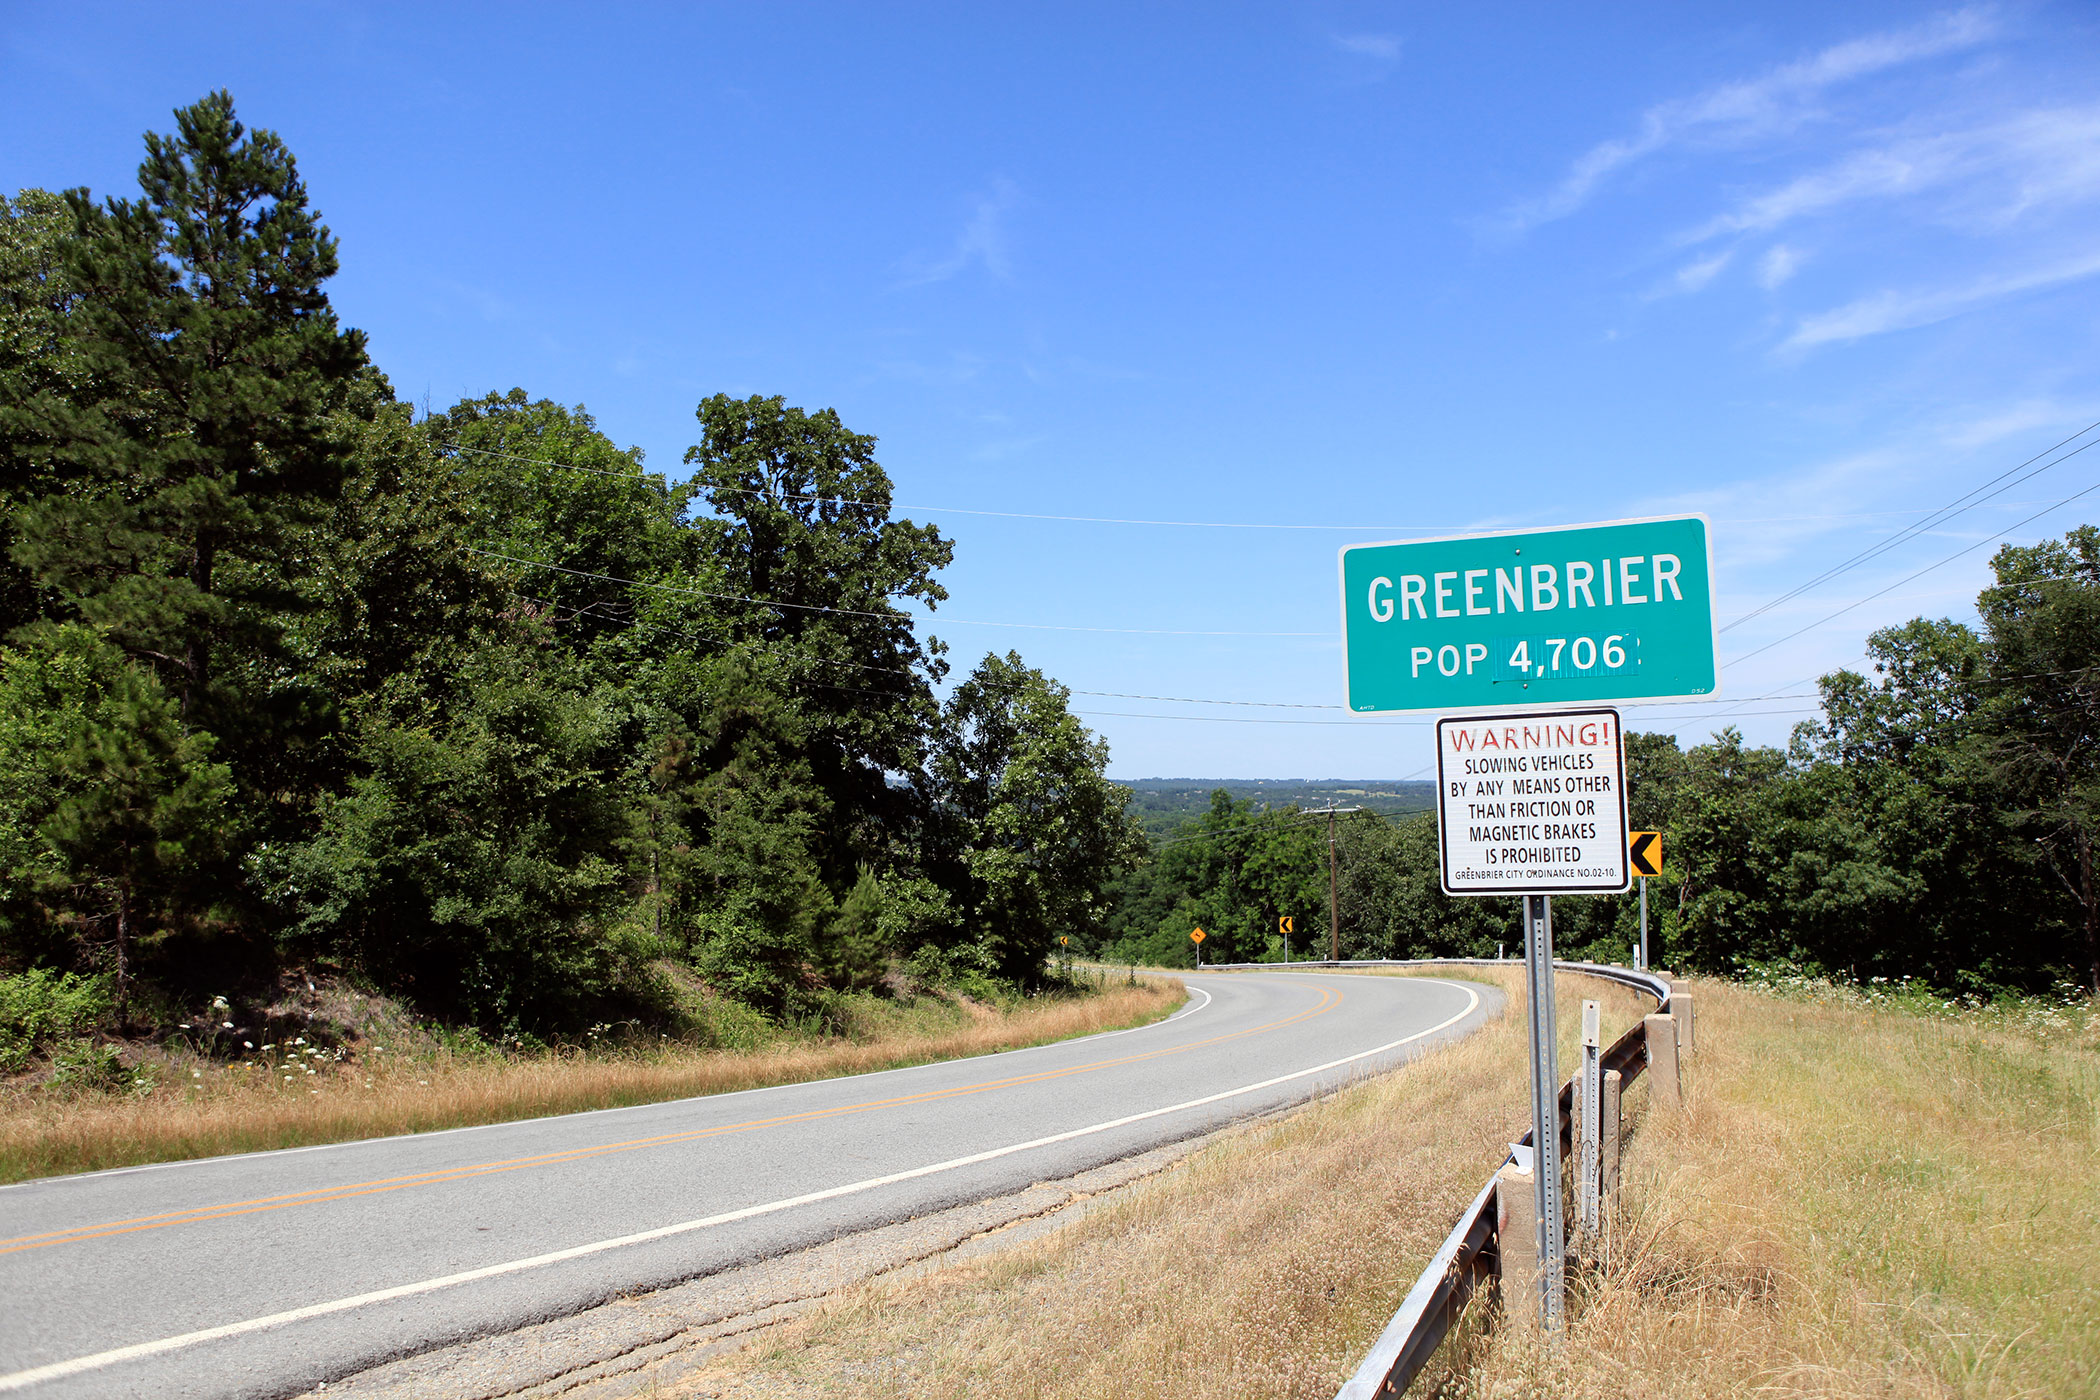 Greenbrier Arkansas City Limit Sign marked with a population of 4,706.